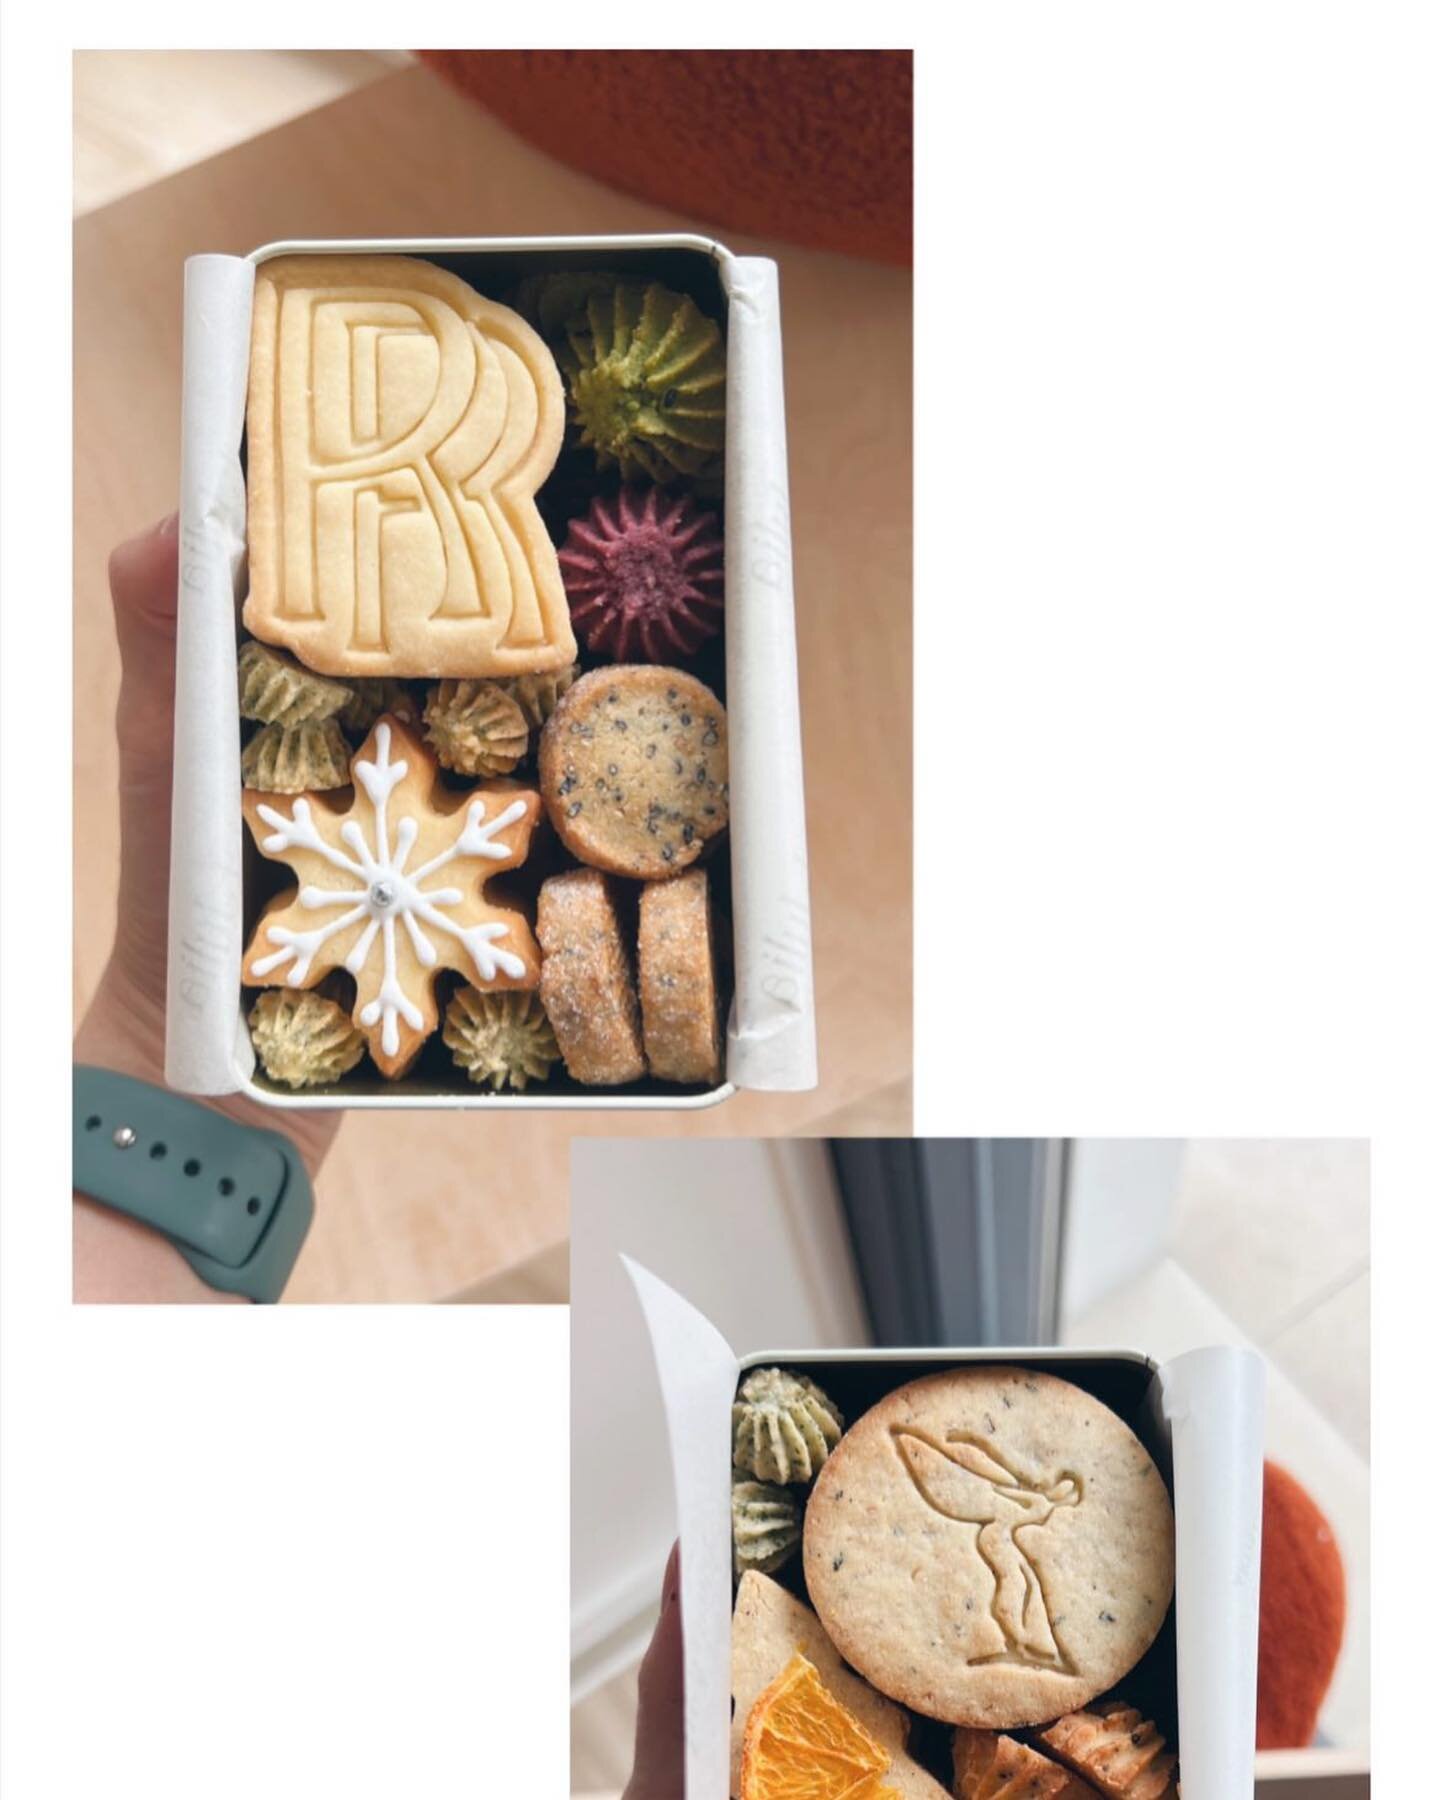 What we got up to last year 🤭

Find out more in our highlights!

#corporategifts #customcookies #cookiebox